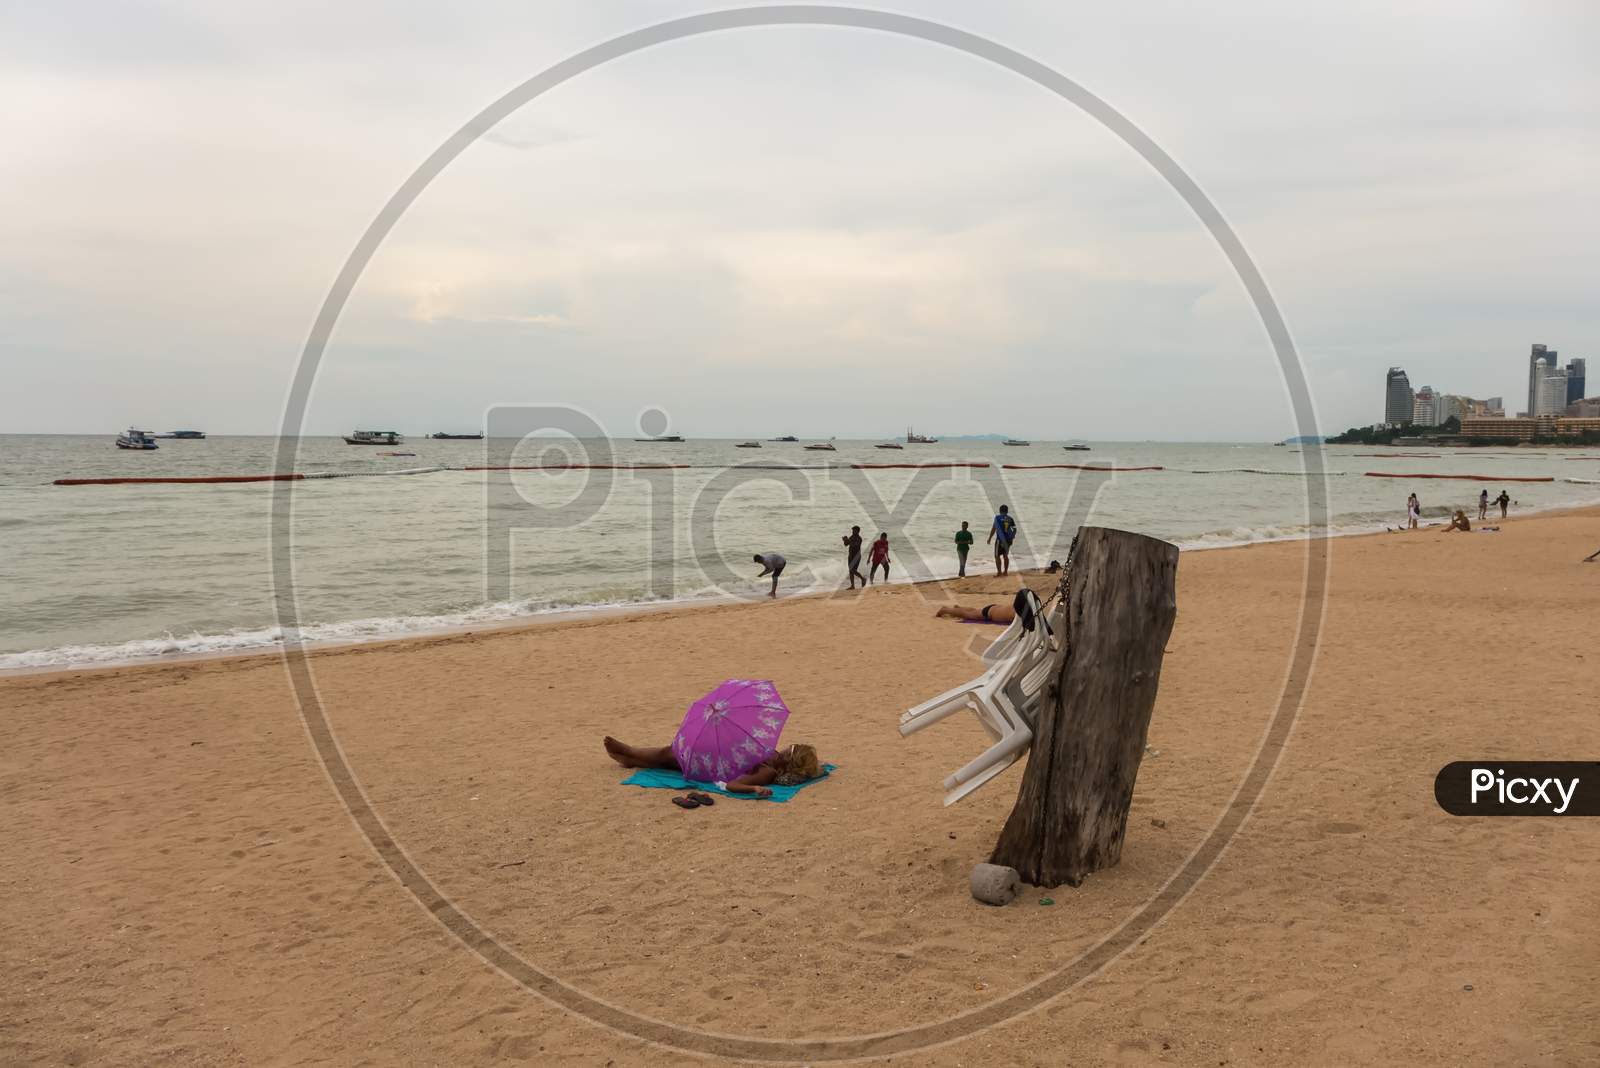 Pattaya,Thailand - October 09,2016: The Beach This Is In The Direction To Naklua On Low Season.Usually The Beach Is A Meeting Point For Starting Boat Trips To Islands Like Koh Larn And Koh Sak.